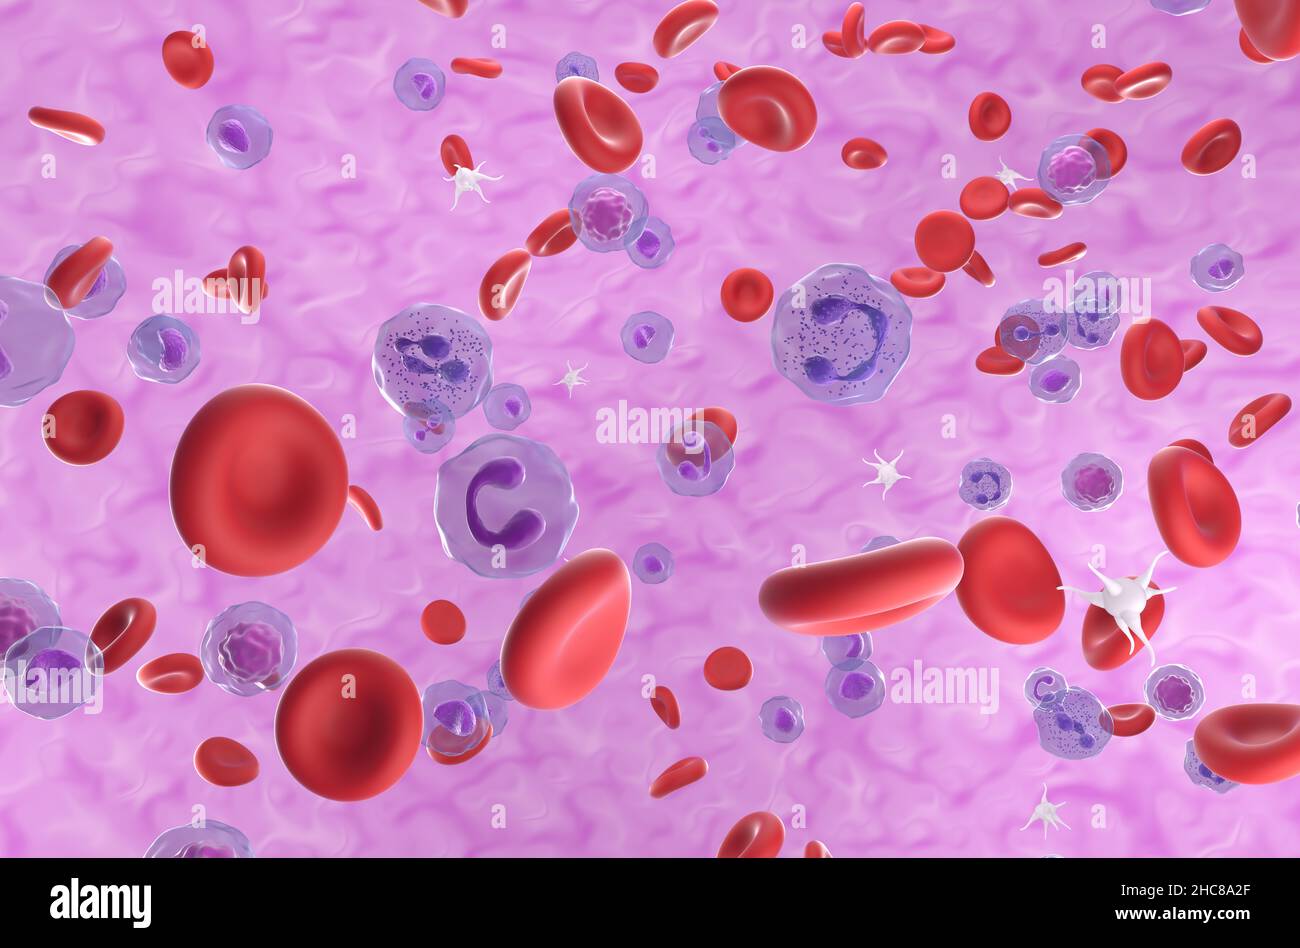 Red and white blood cells with platelets  isometric view 3d illustration Stock Photo